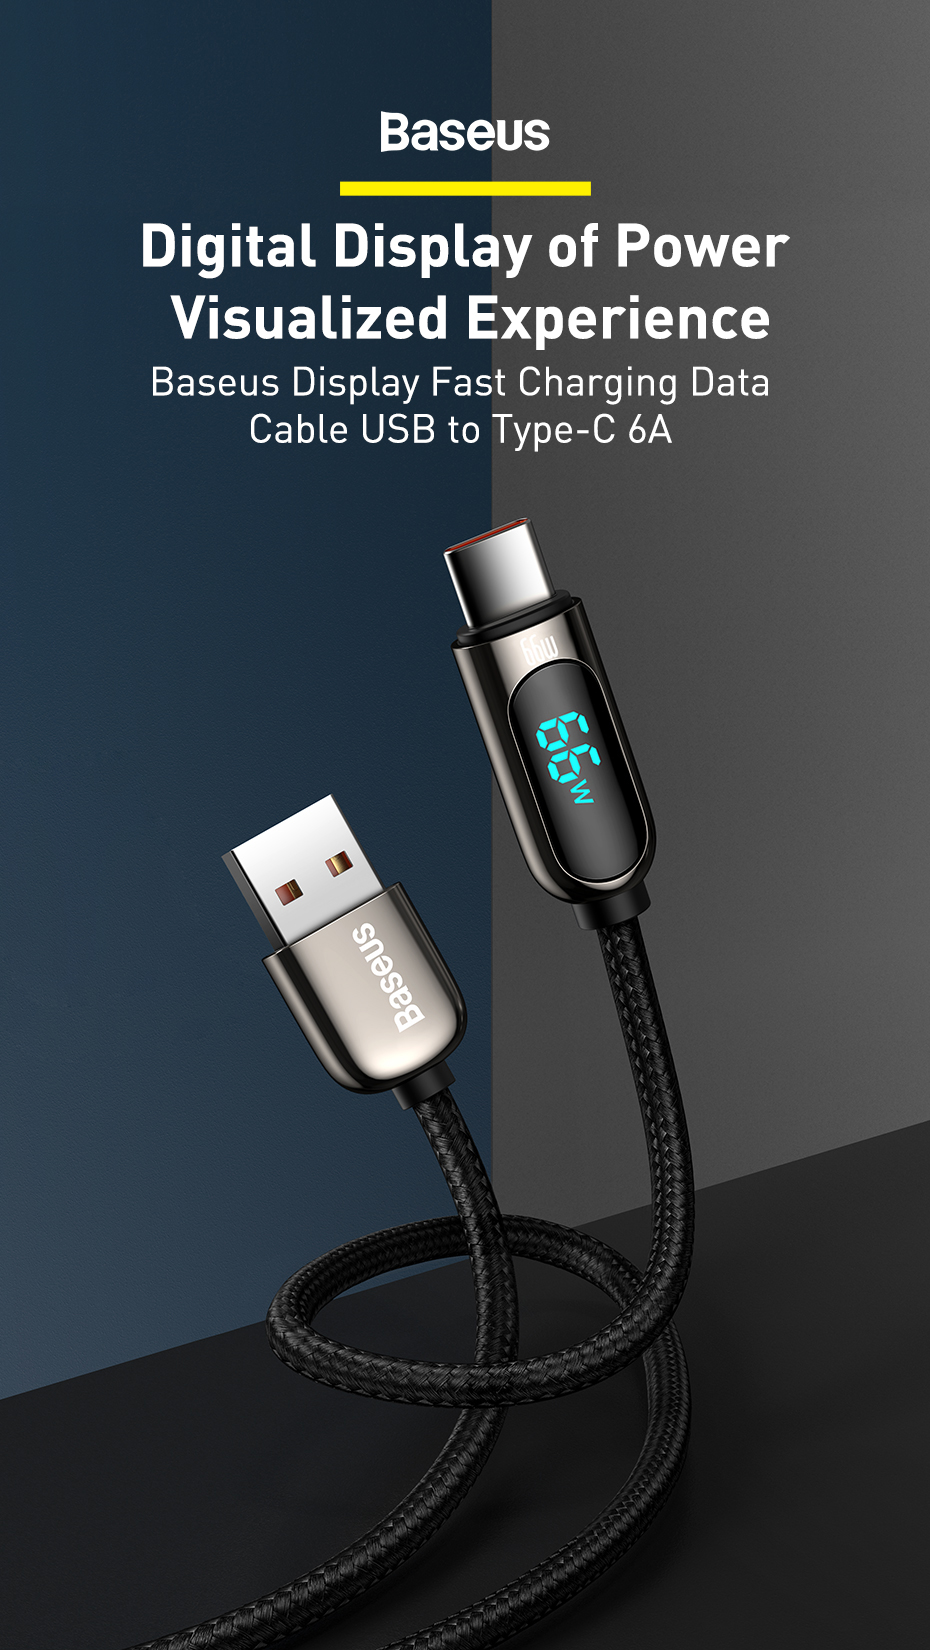 Baseus-66W-USB-to-USB-C-Digital-Display-Cable-Fast-Charging-Data-Transmission-Cord-Line-12m-long-For-1900290-1